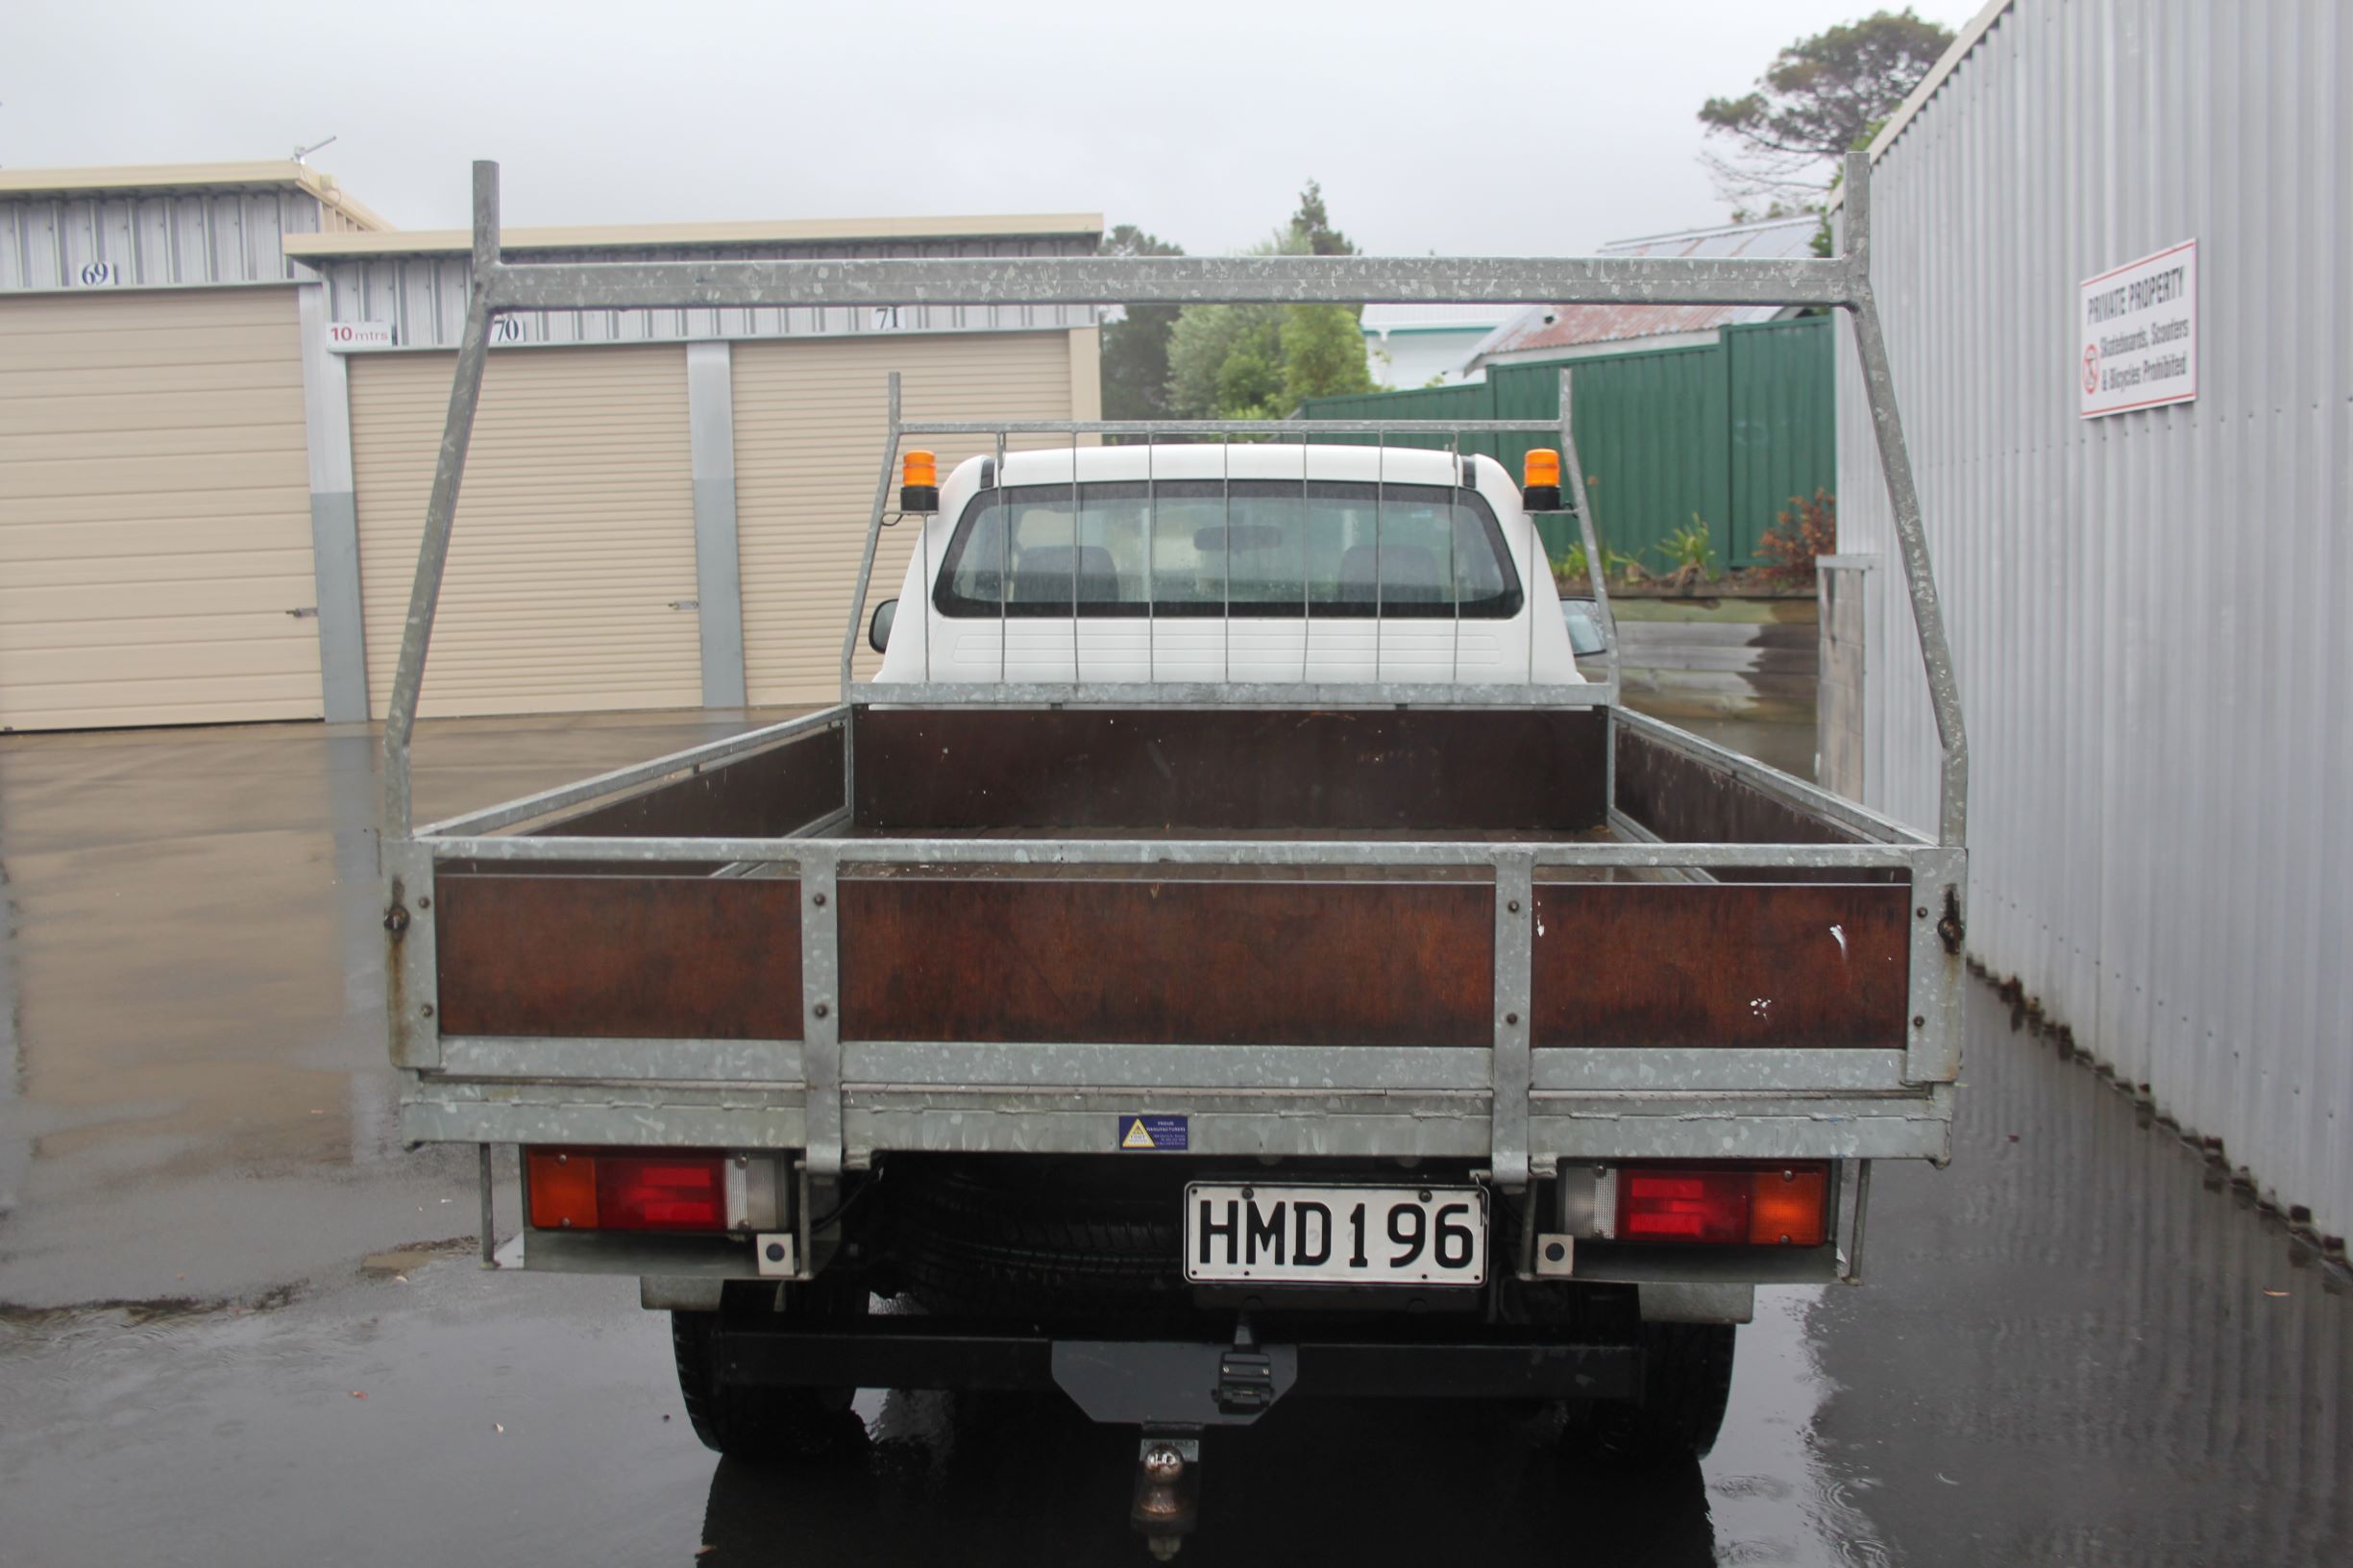 Toyota HILUX FLATDECK 4WD 2015 for sale in Auckland